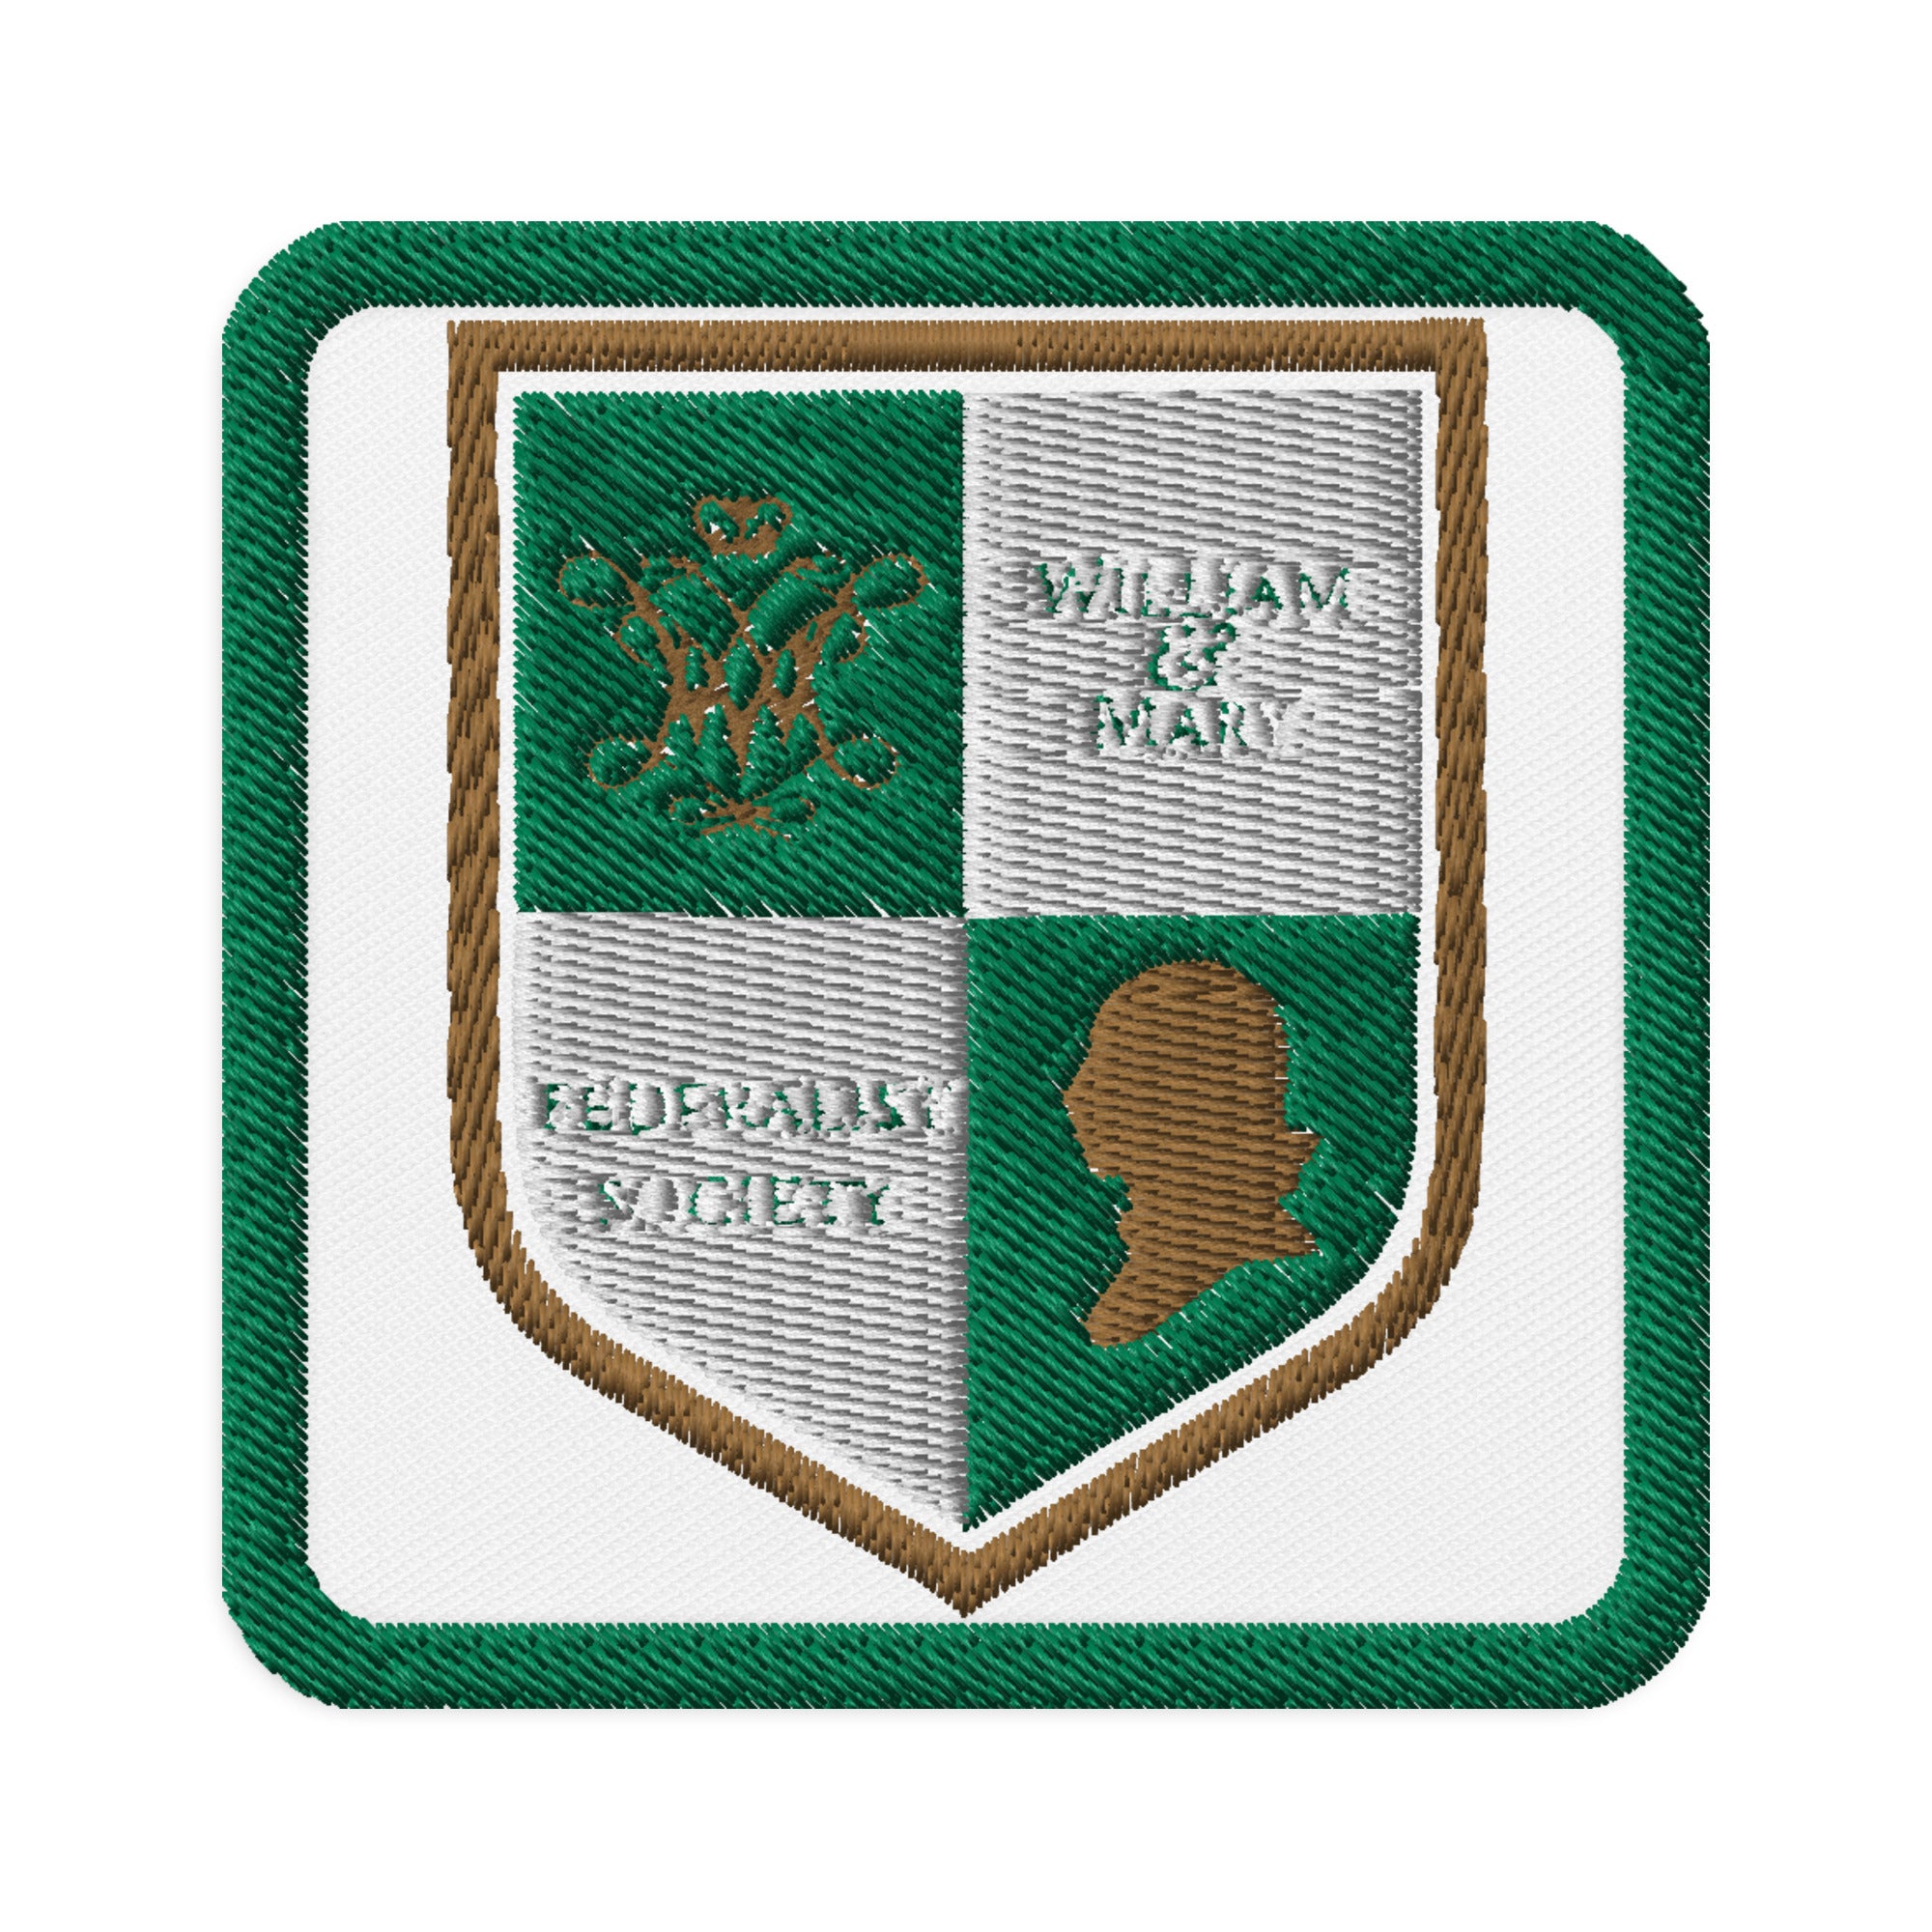 Patch (William & Mary Fed Soc)